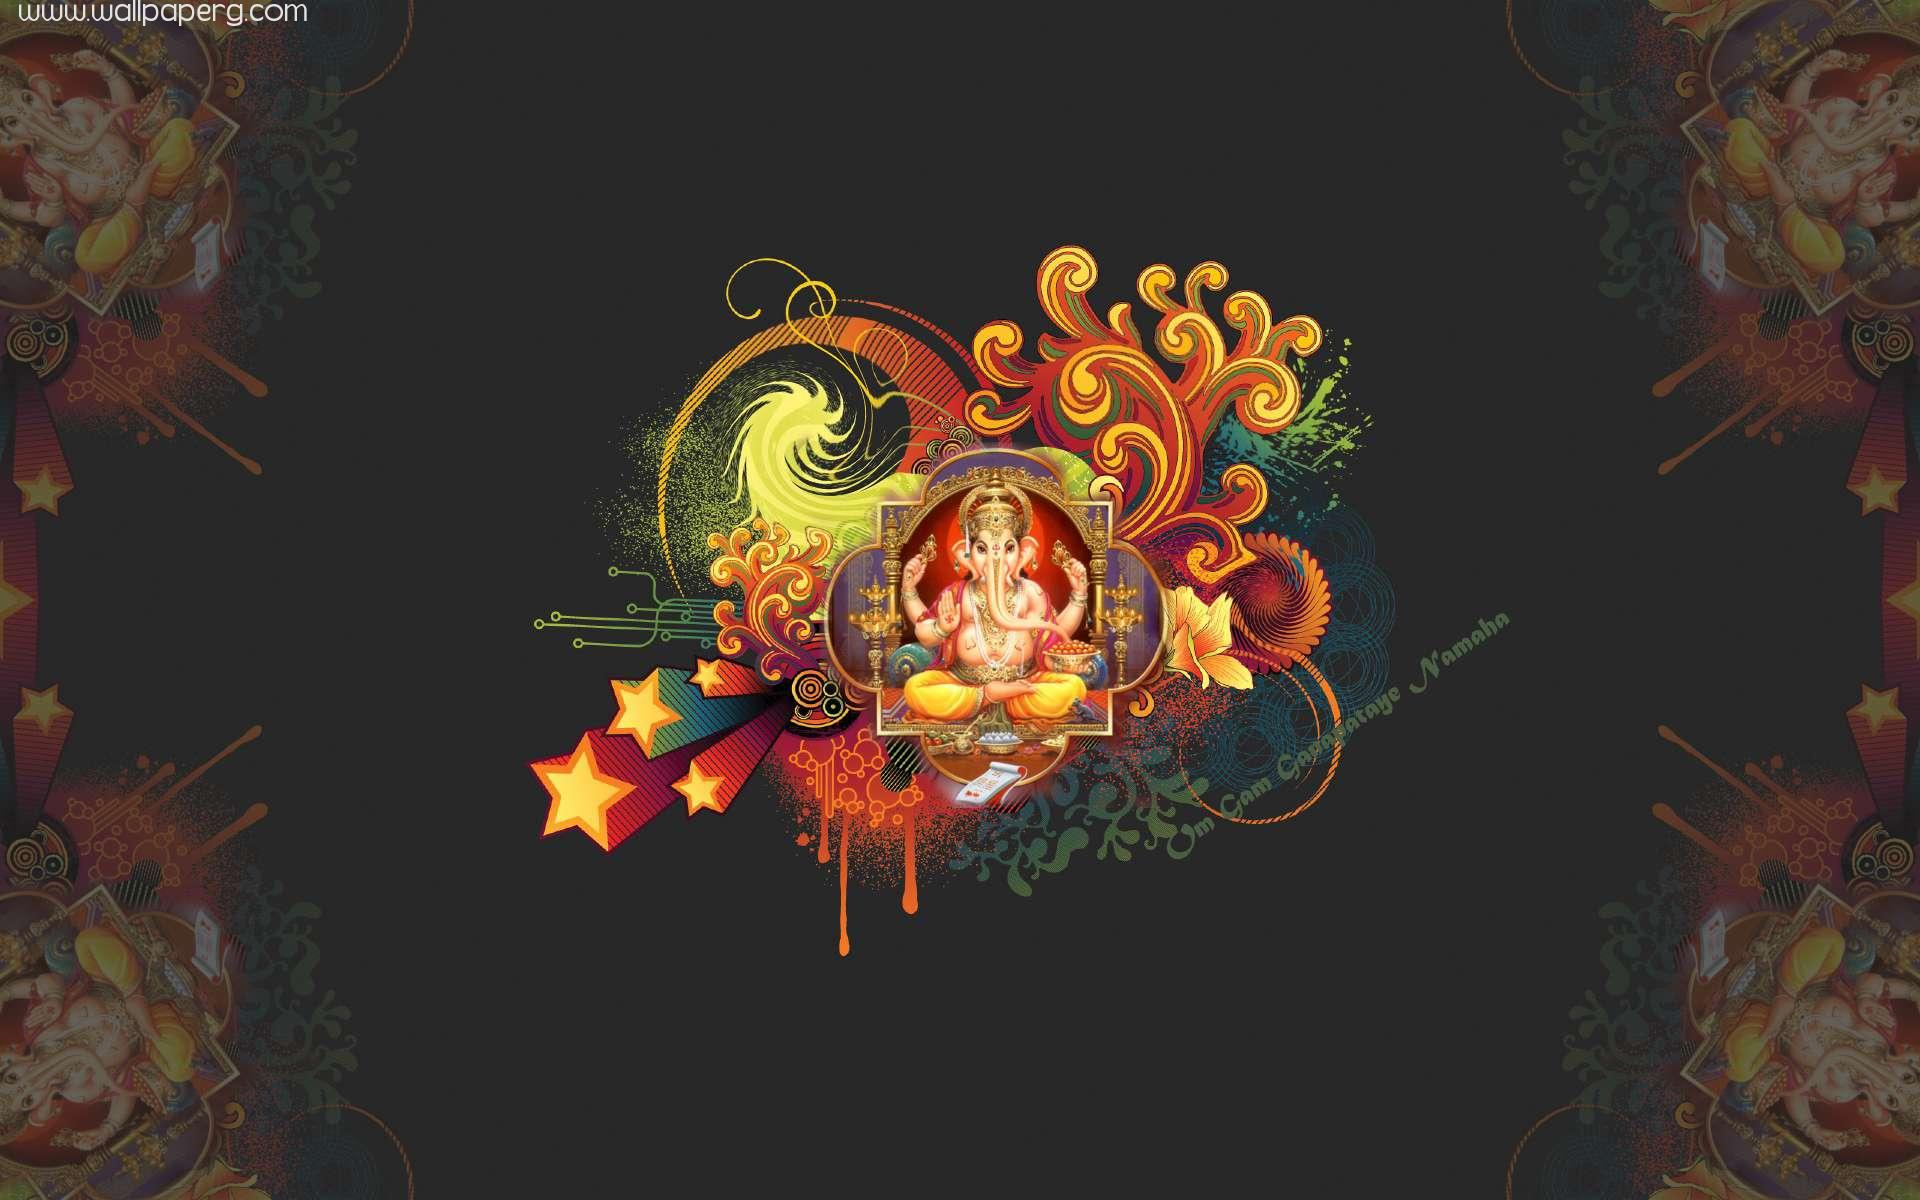 Download Ganesh - Ganesh chaturthi images for your mobile cell phone